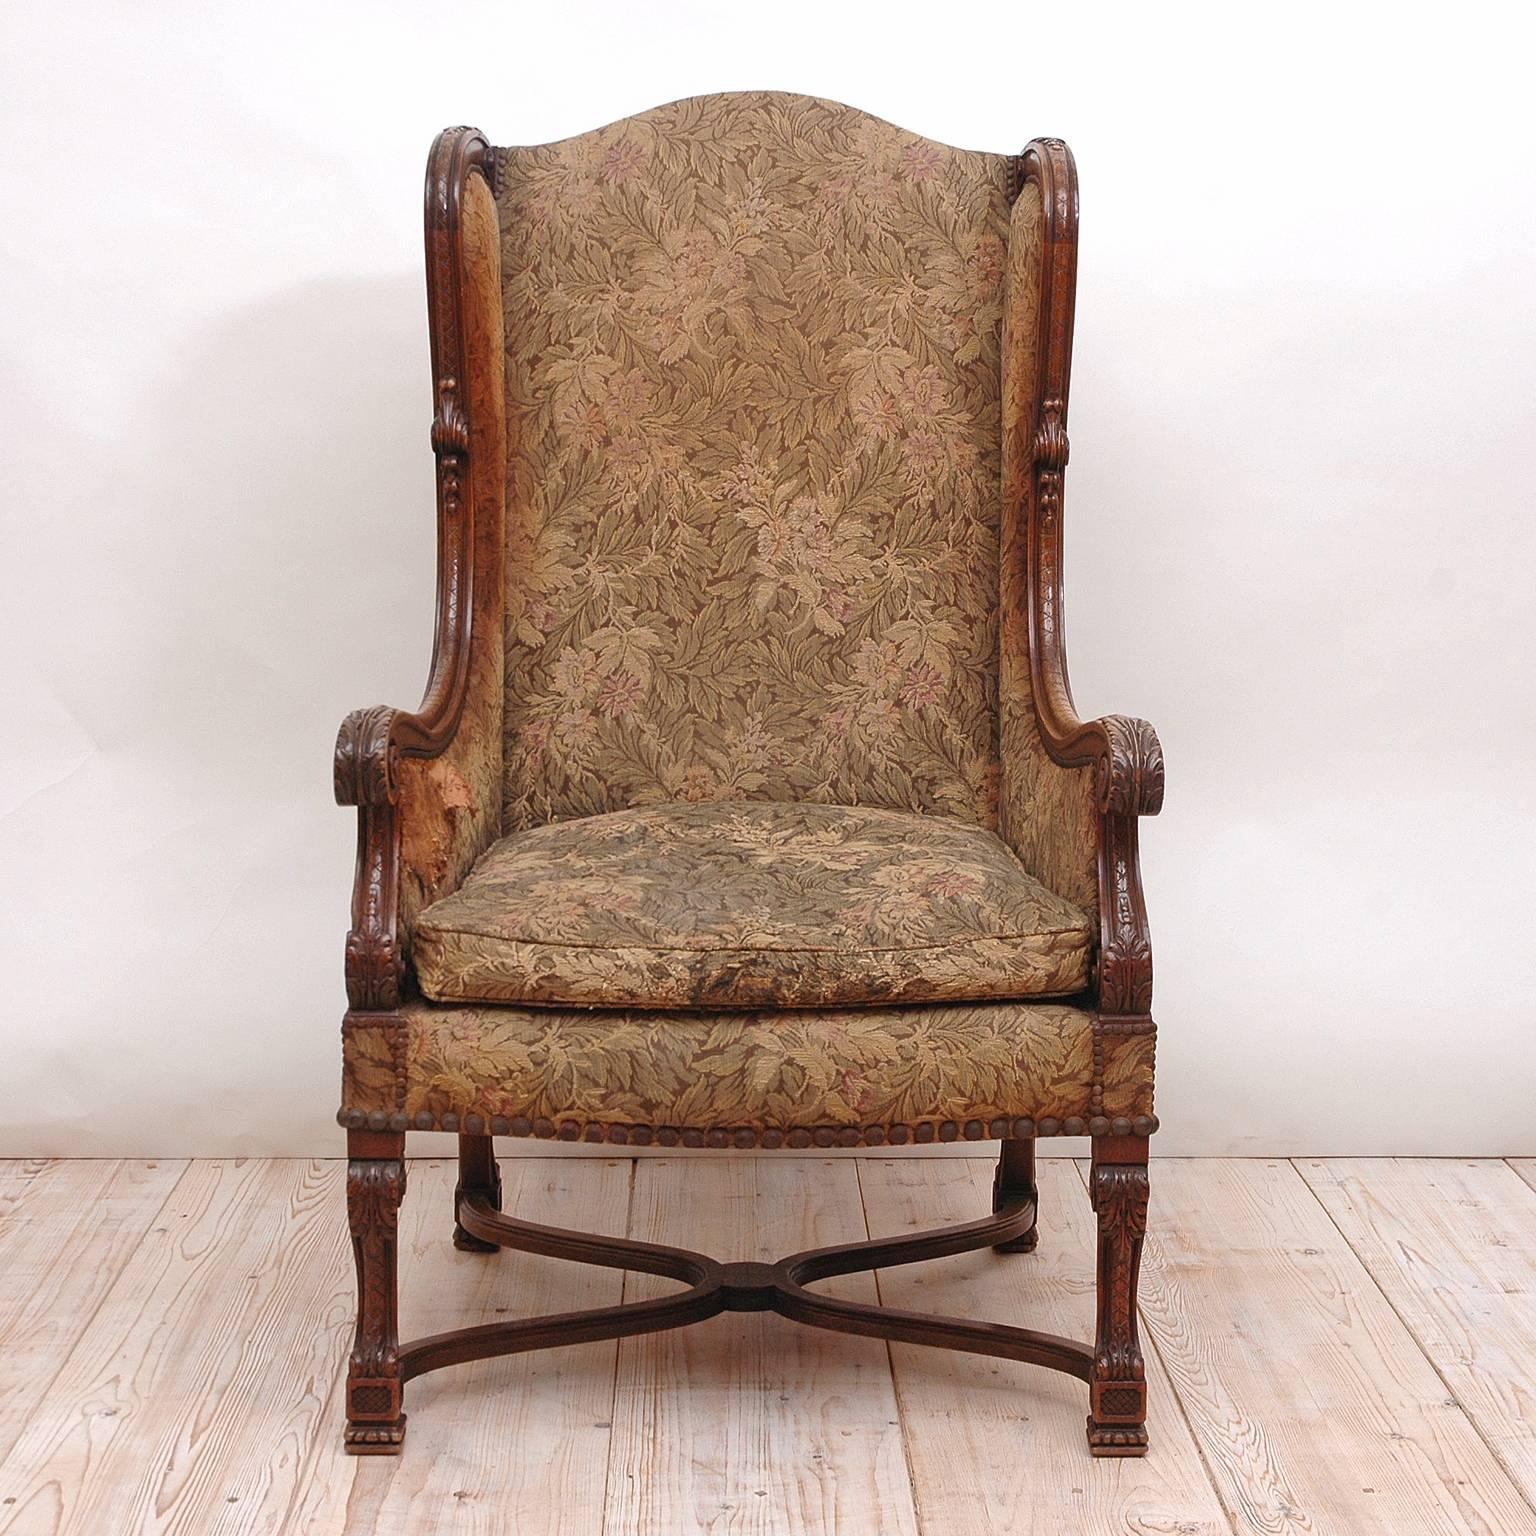 A handsome Renaissance style wingback chair with nicely carved hardwood frame, upholstered back and loose upholstered seat from the Belle Époque. Features carved scrolled arms with acanthus leaves, carved 